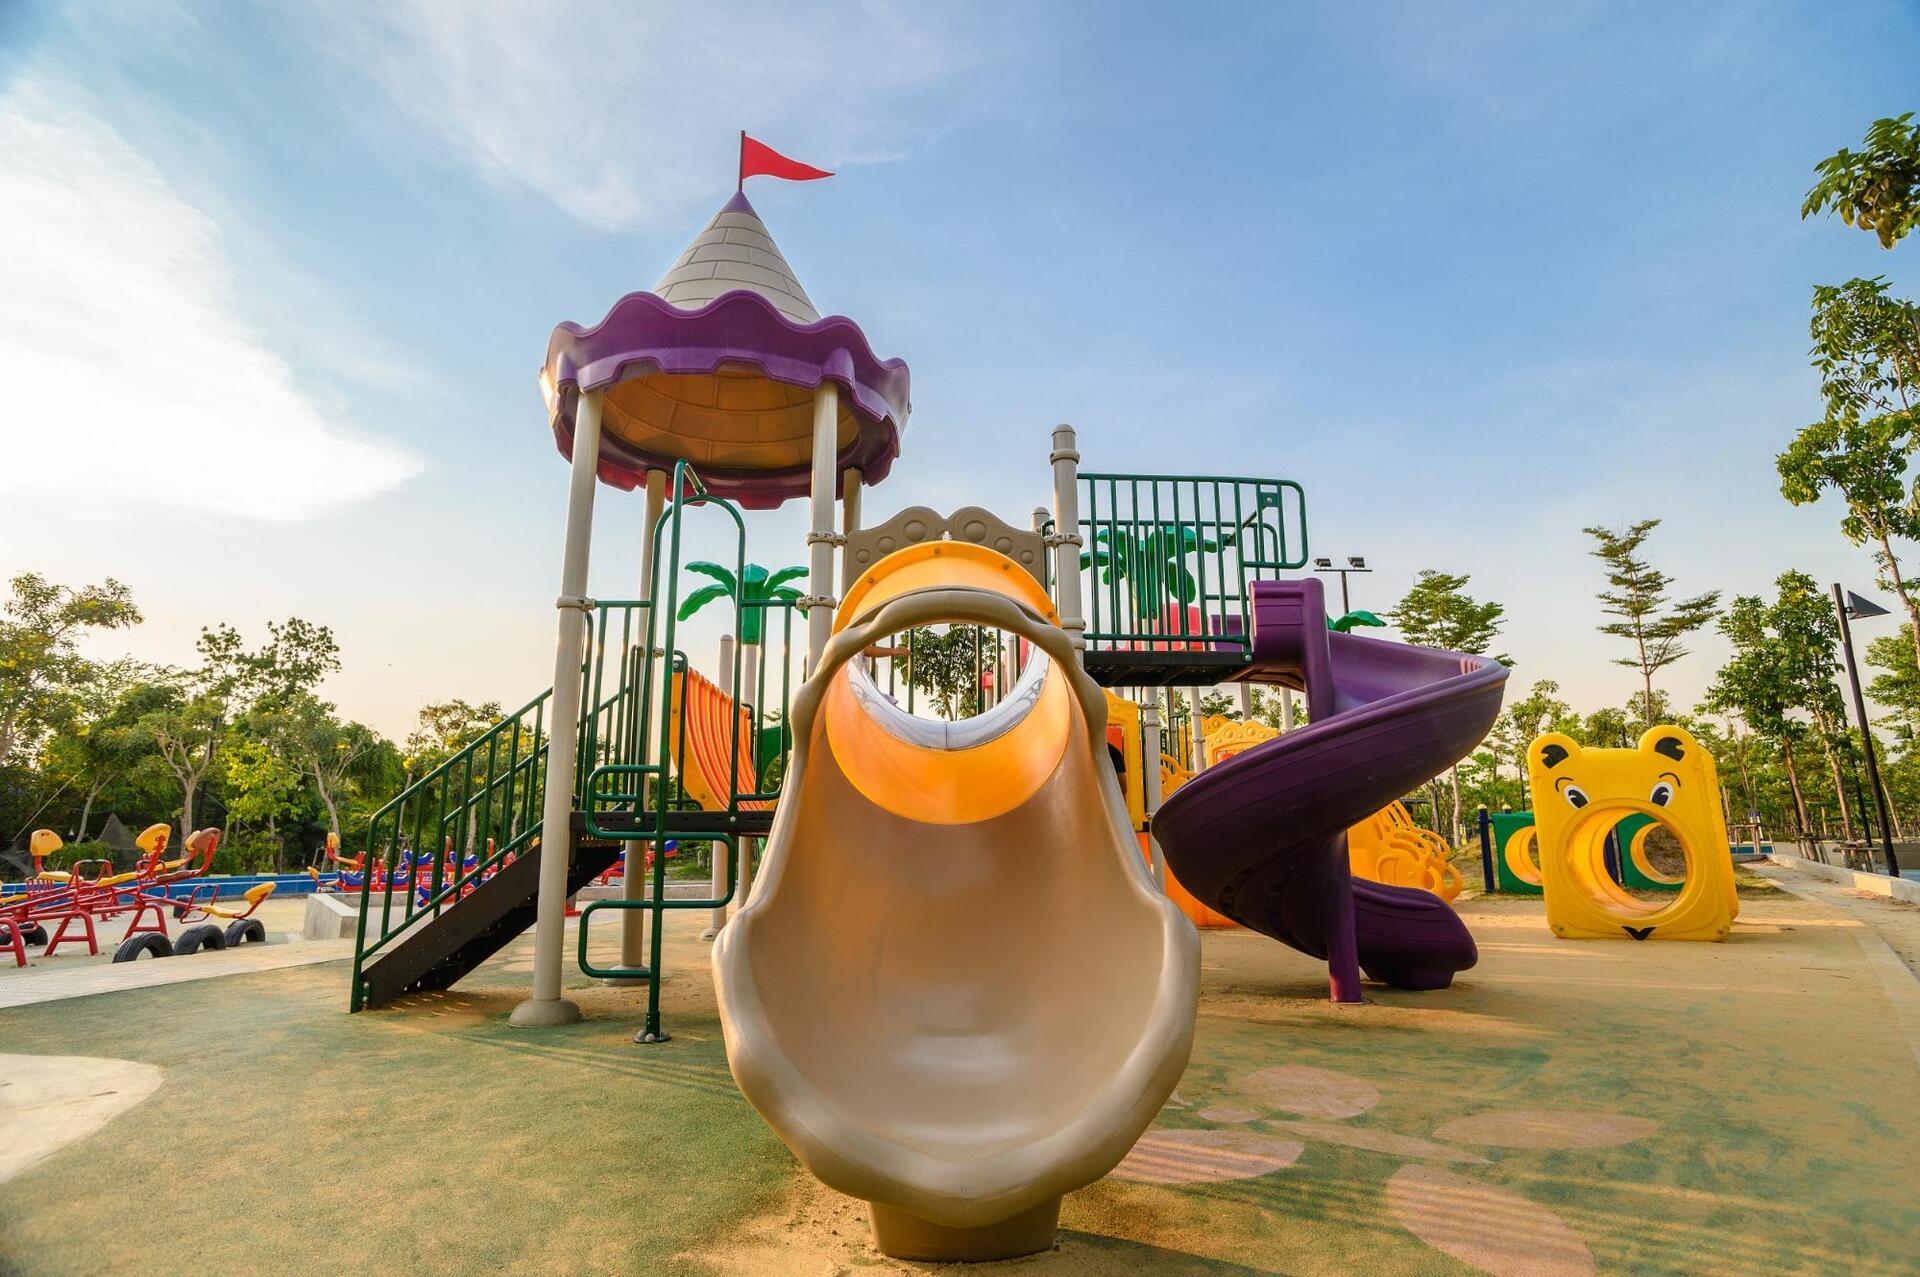 How Often Should Safety Inspections Of Indoor And Outdoor Play Areas Be Completed?